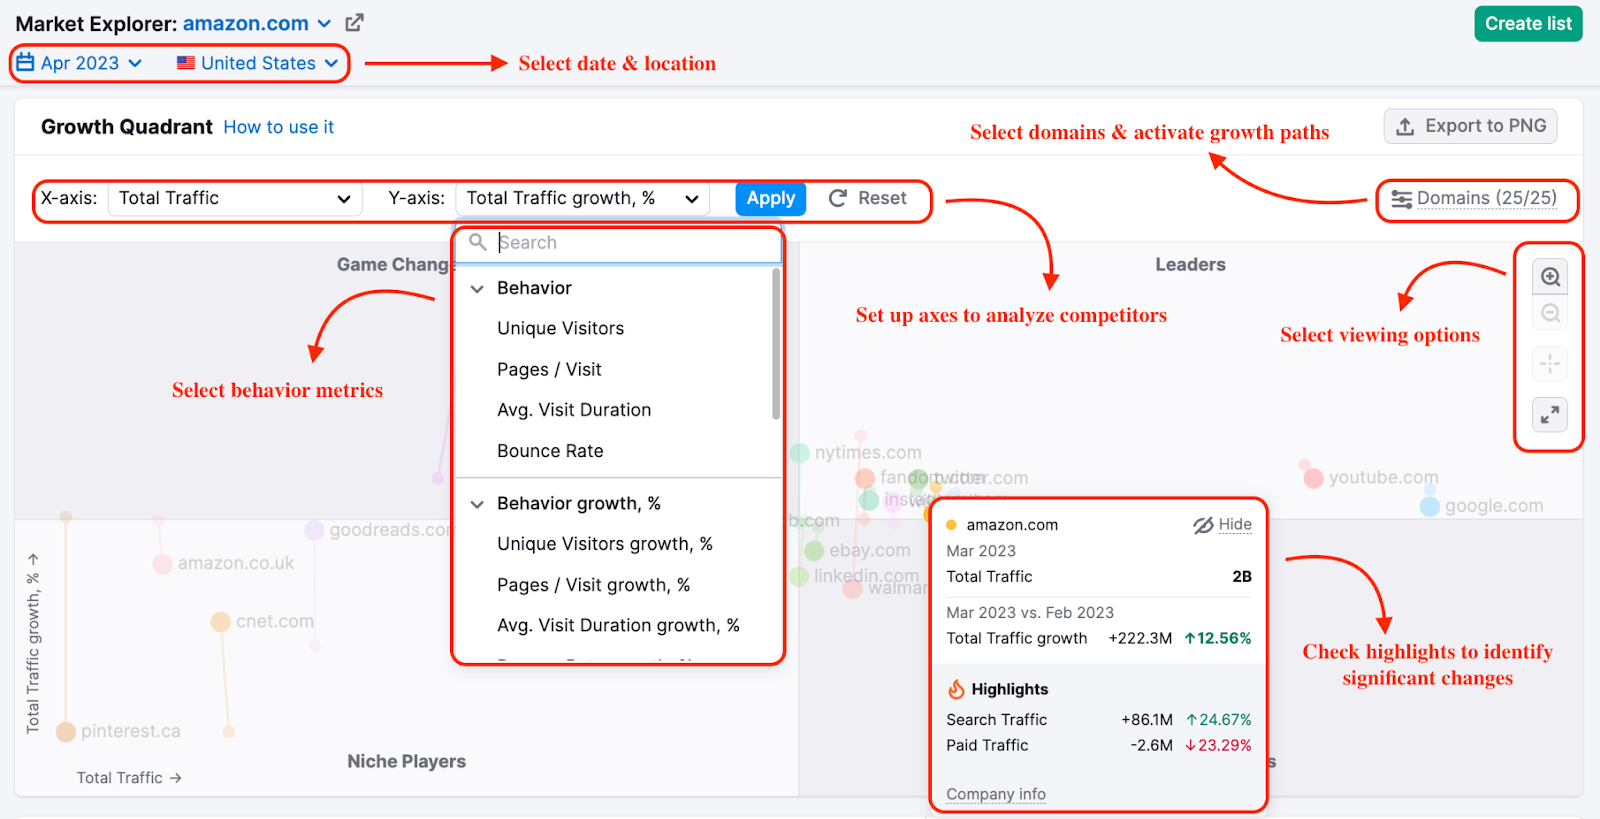 Growth Quadrant widget in Market Explorer and filters you can use in it.